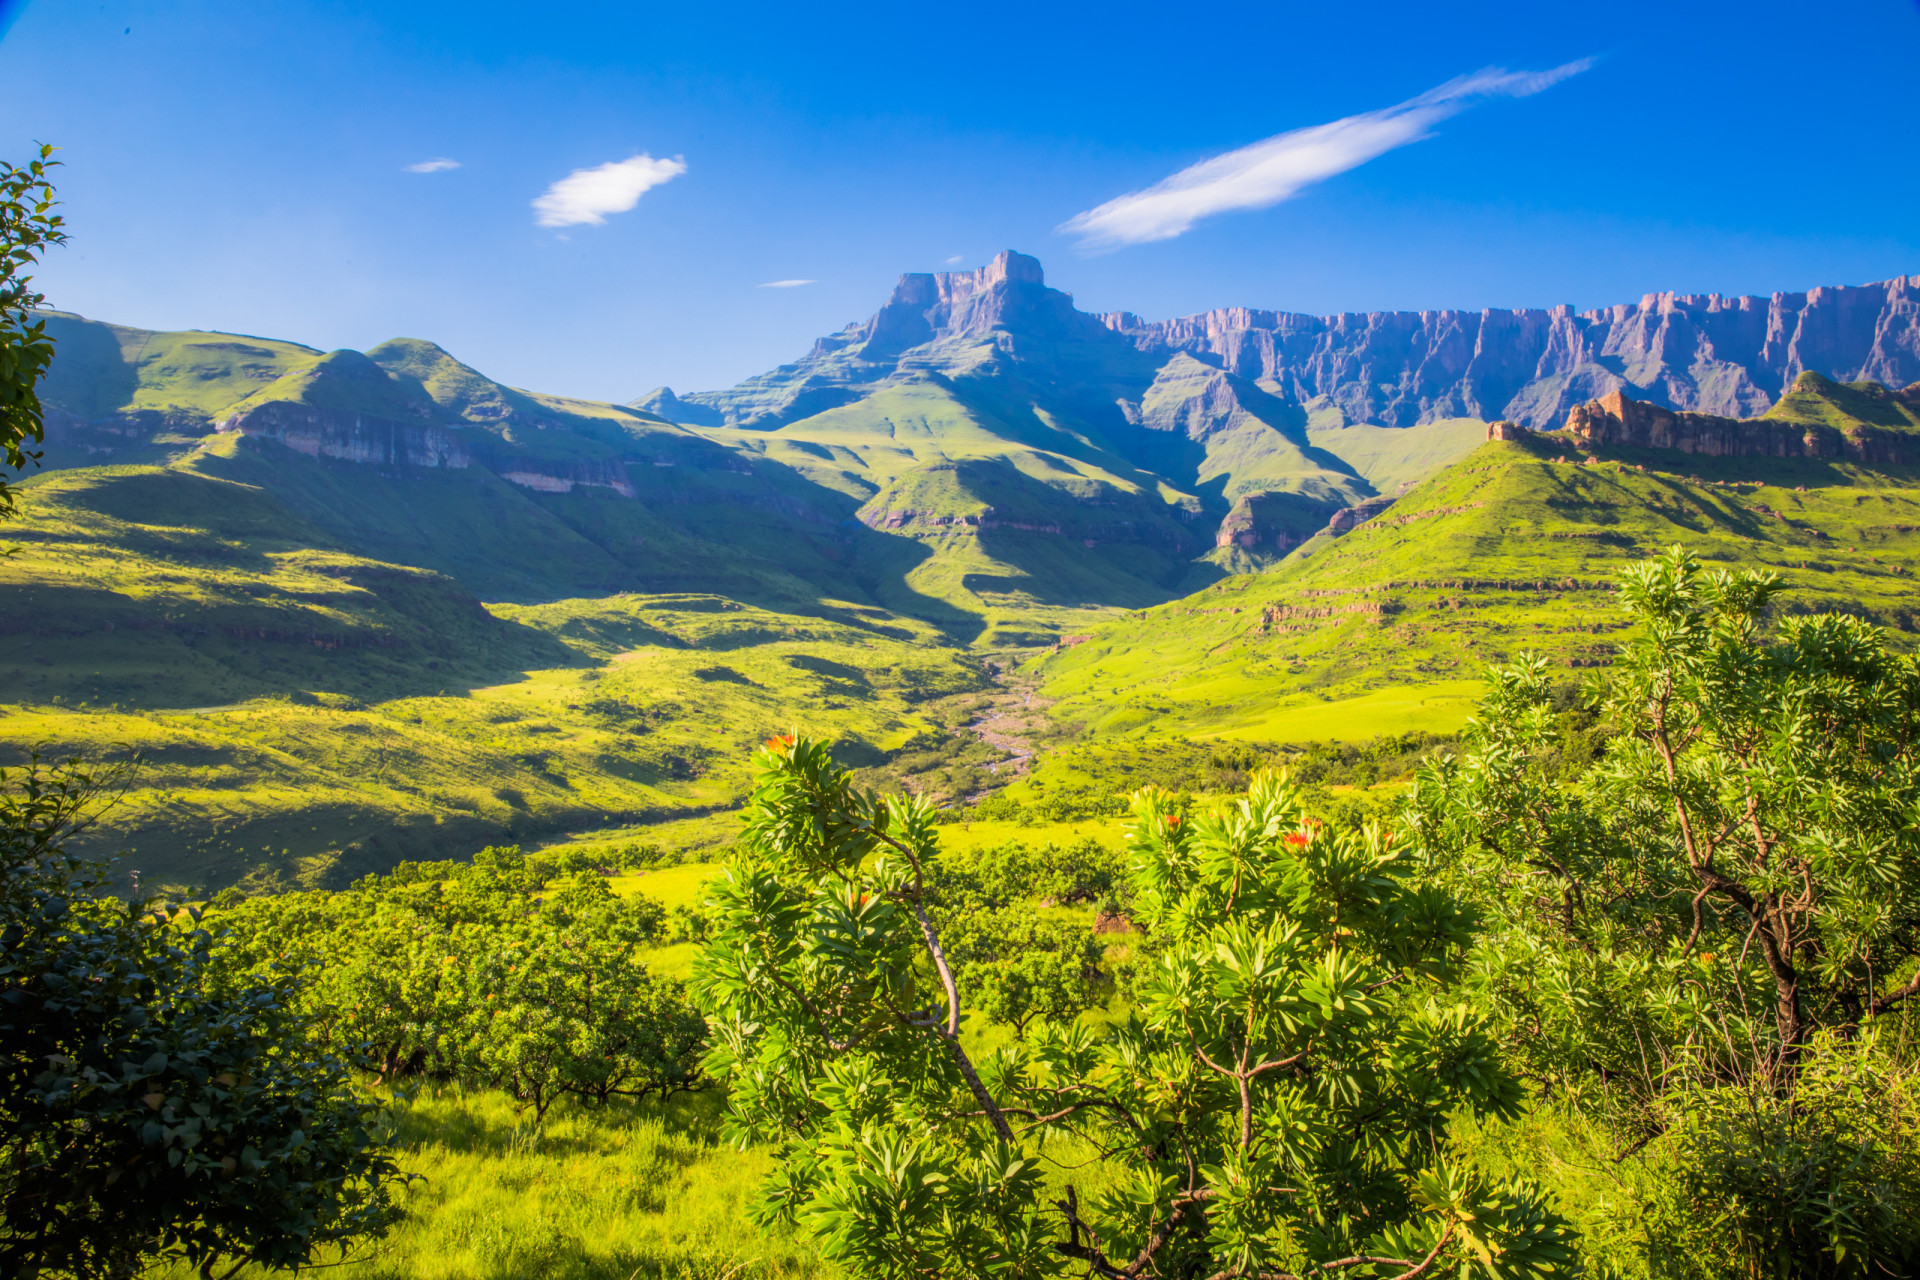 <p>KwaZulu-Natal's natural wonders extend to a pair of UNESCO World Heritage Sites—the magnificent iSimangaliso Wetland Park and the majestic uKhahlamba-Drakensberg National Park (pictured). Expect sightings of lions, cheetahs, elephants, giraffes, and black rhinos, among other splendid beasts.</p>